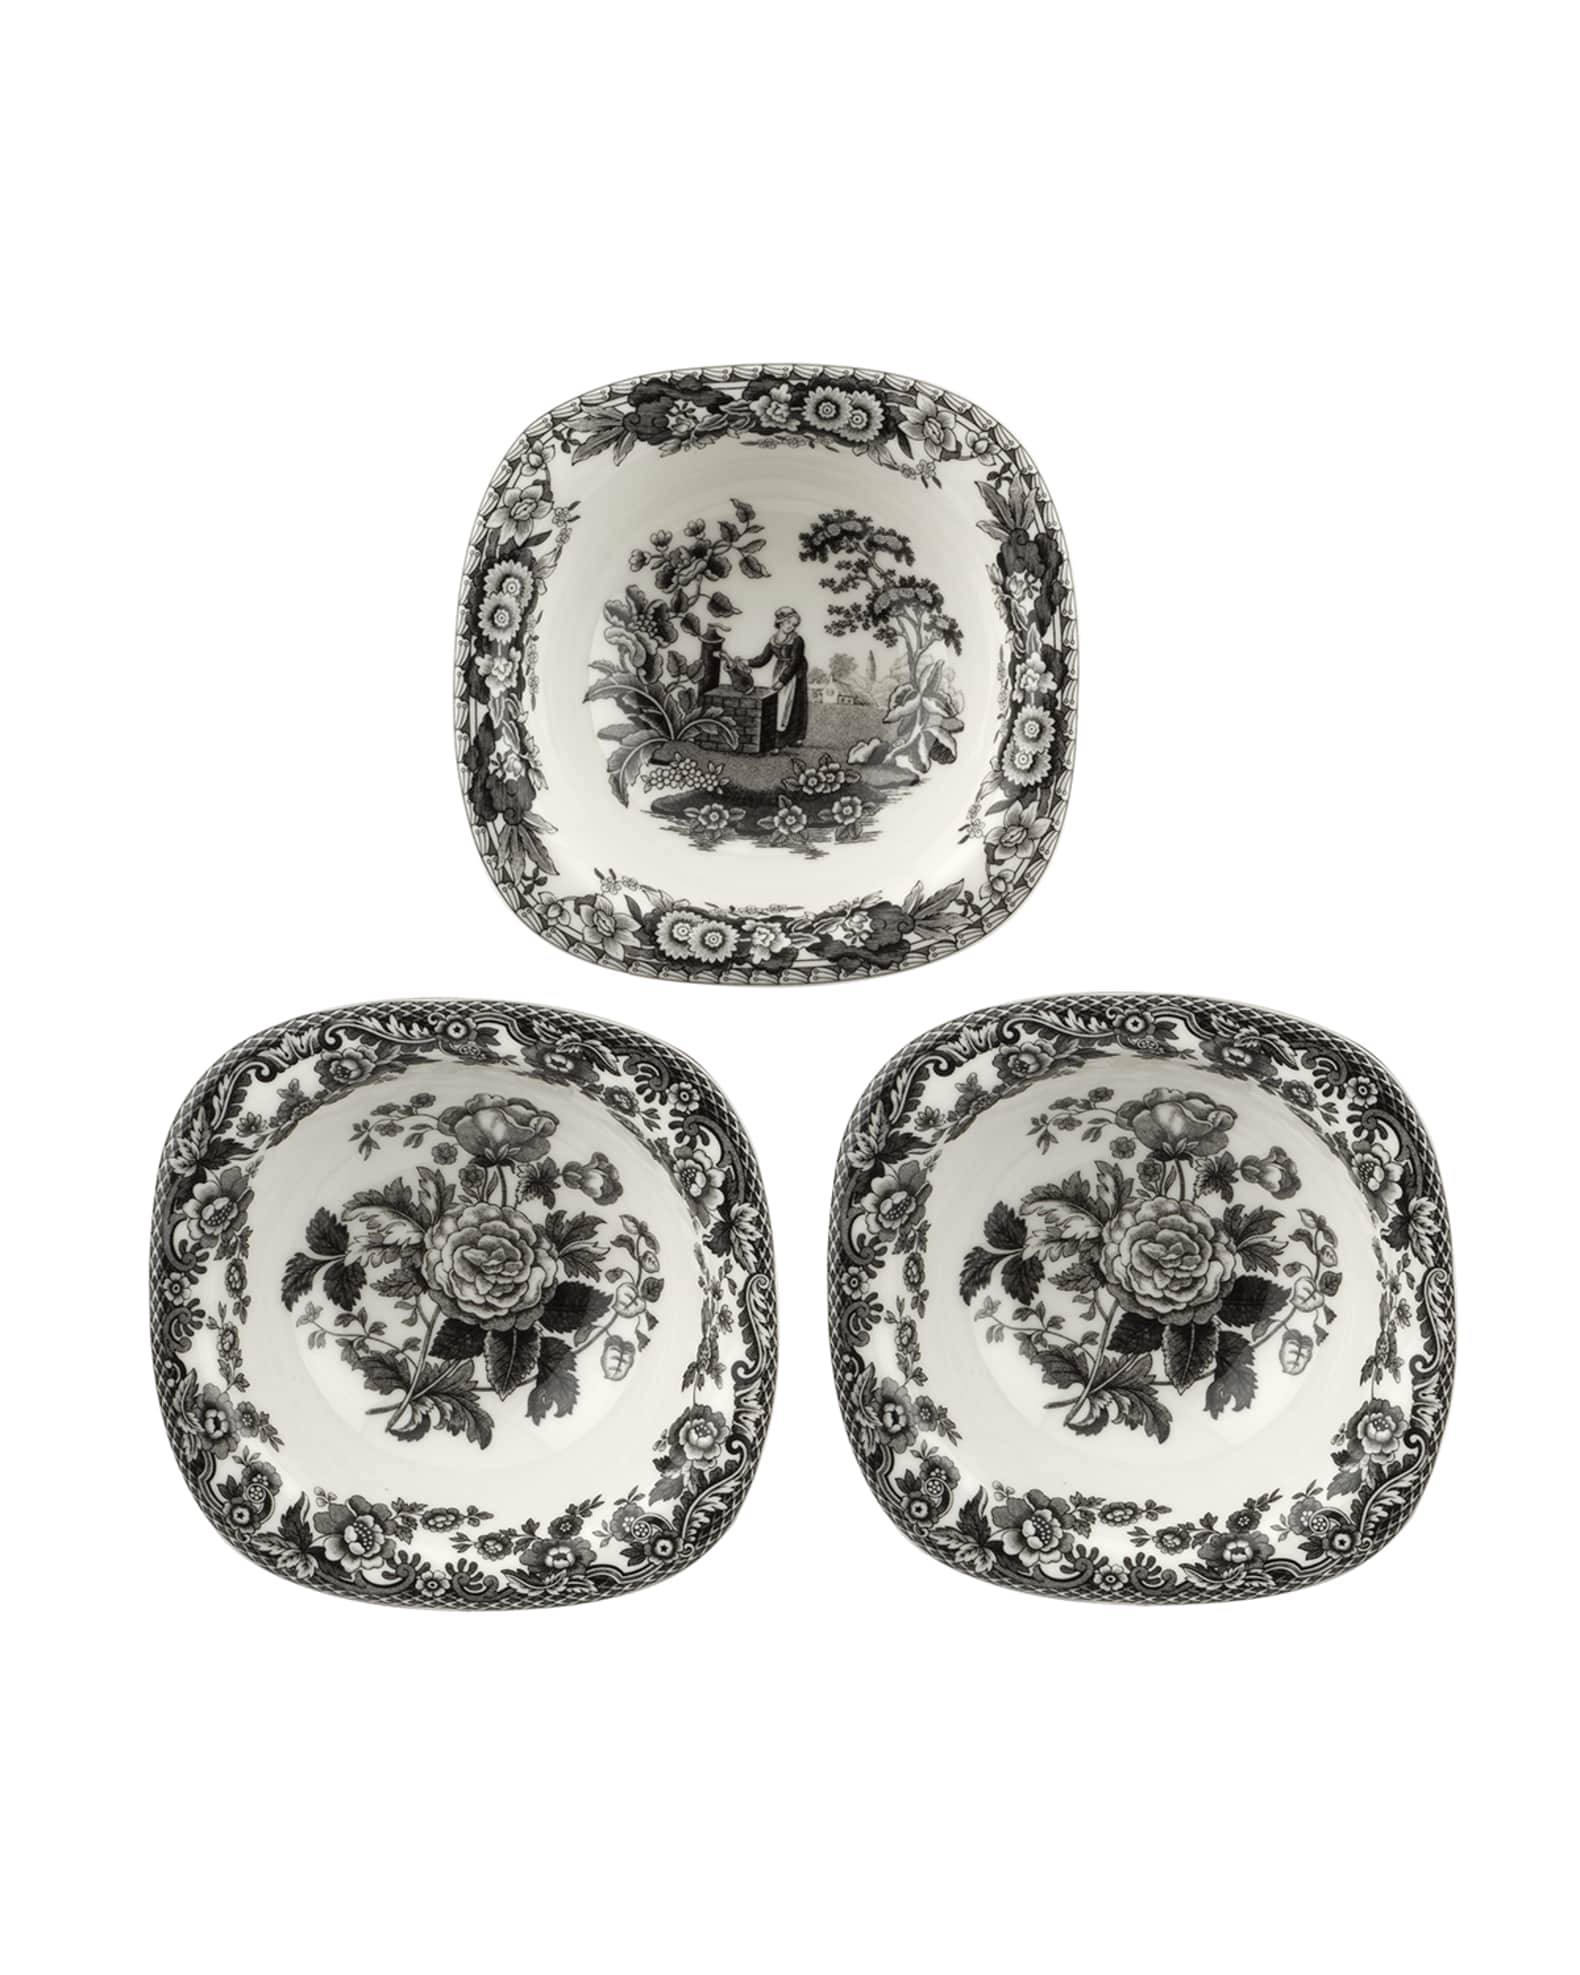 Spode Heritage Dip Dishes, Set of 3